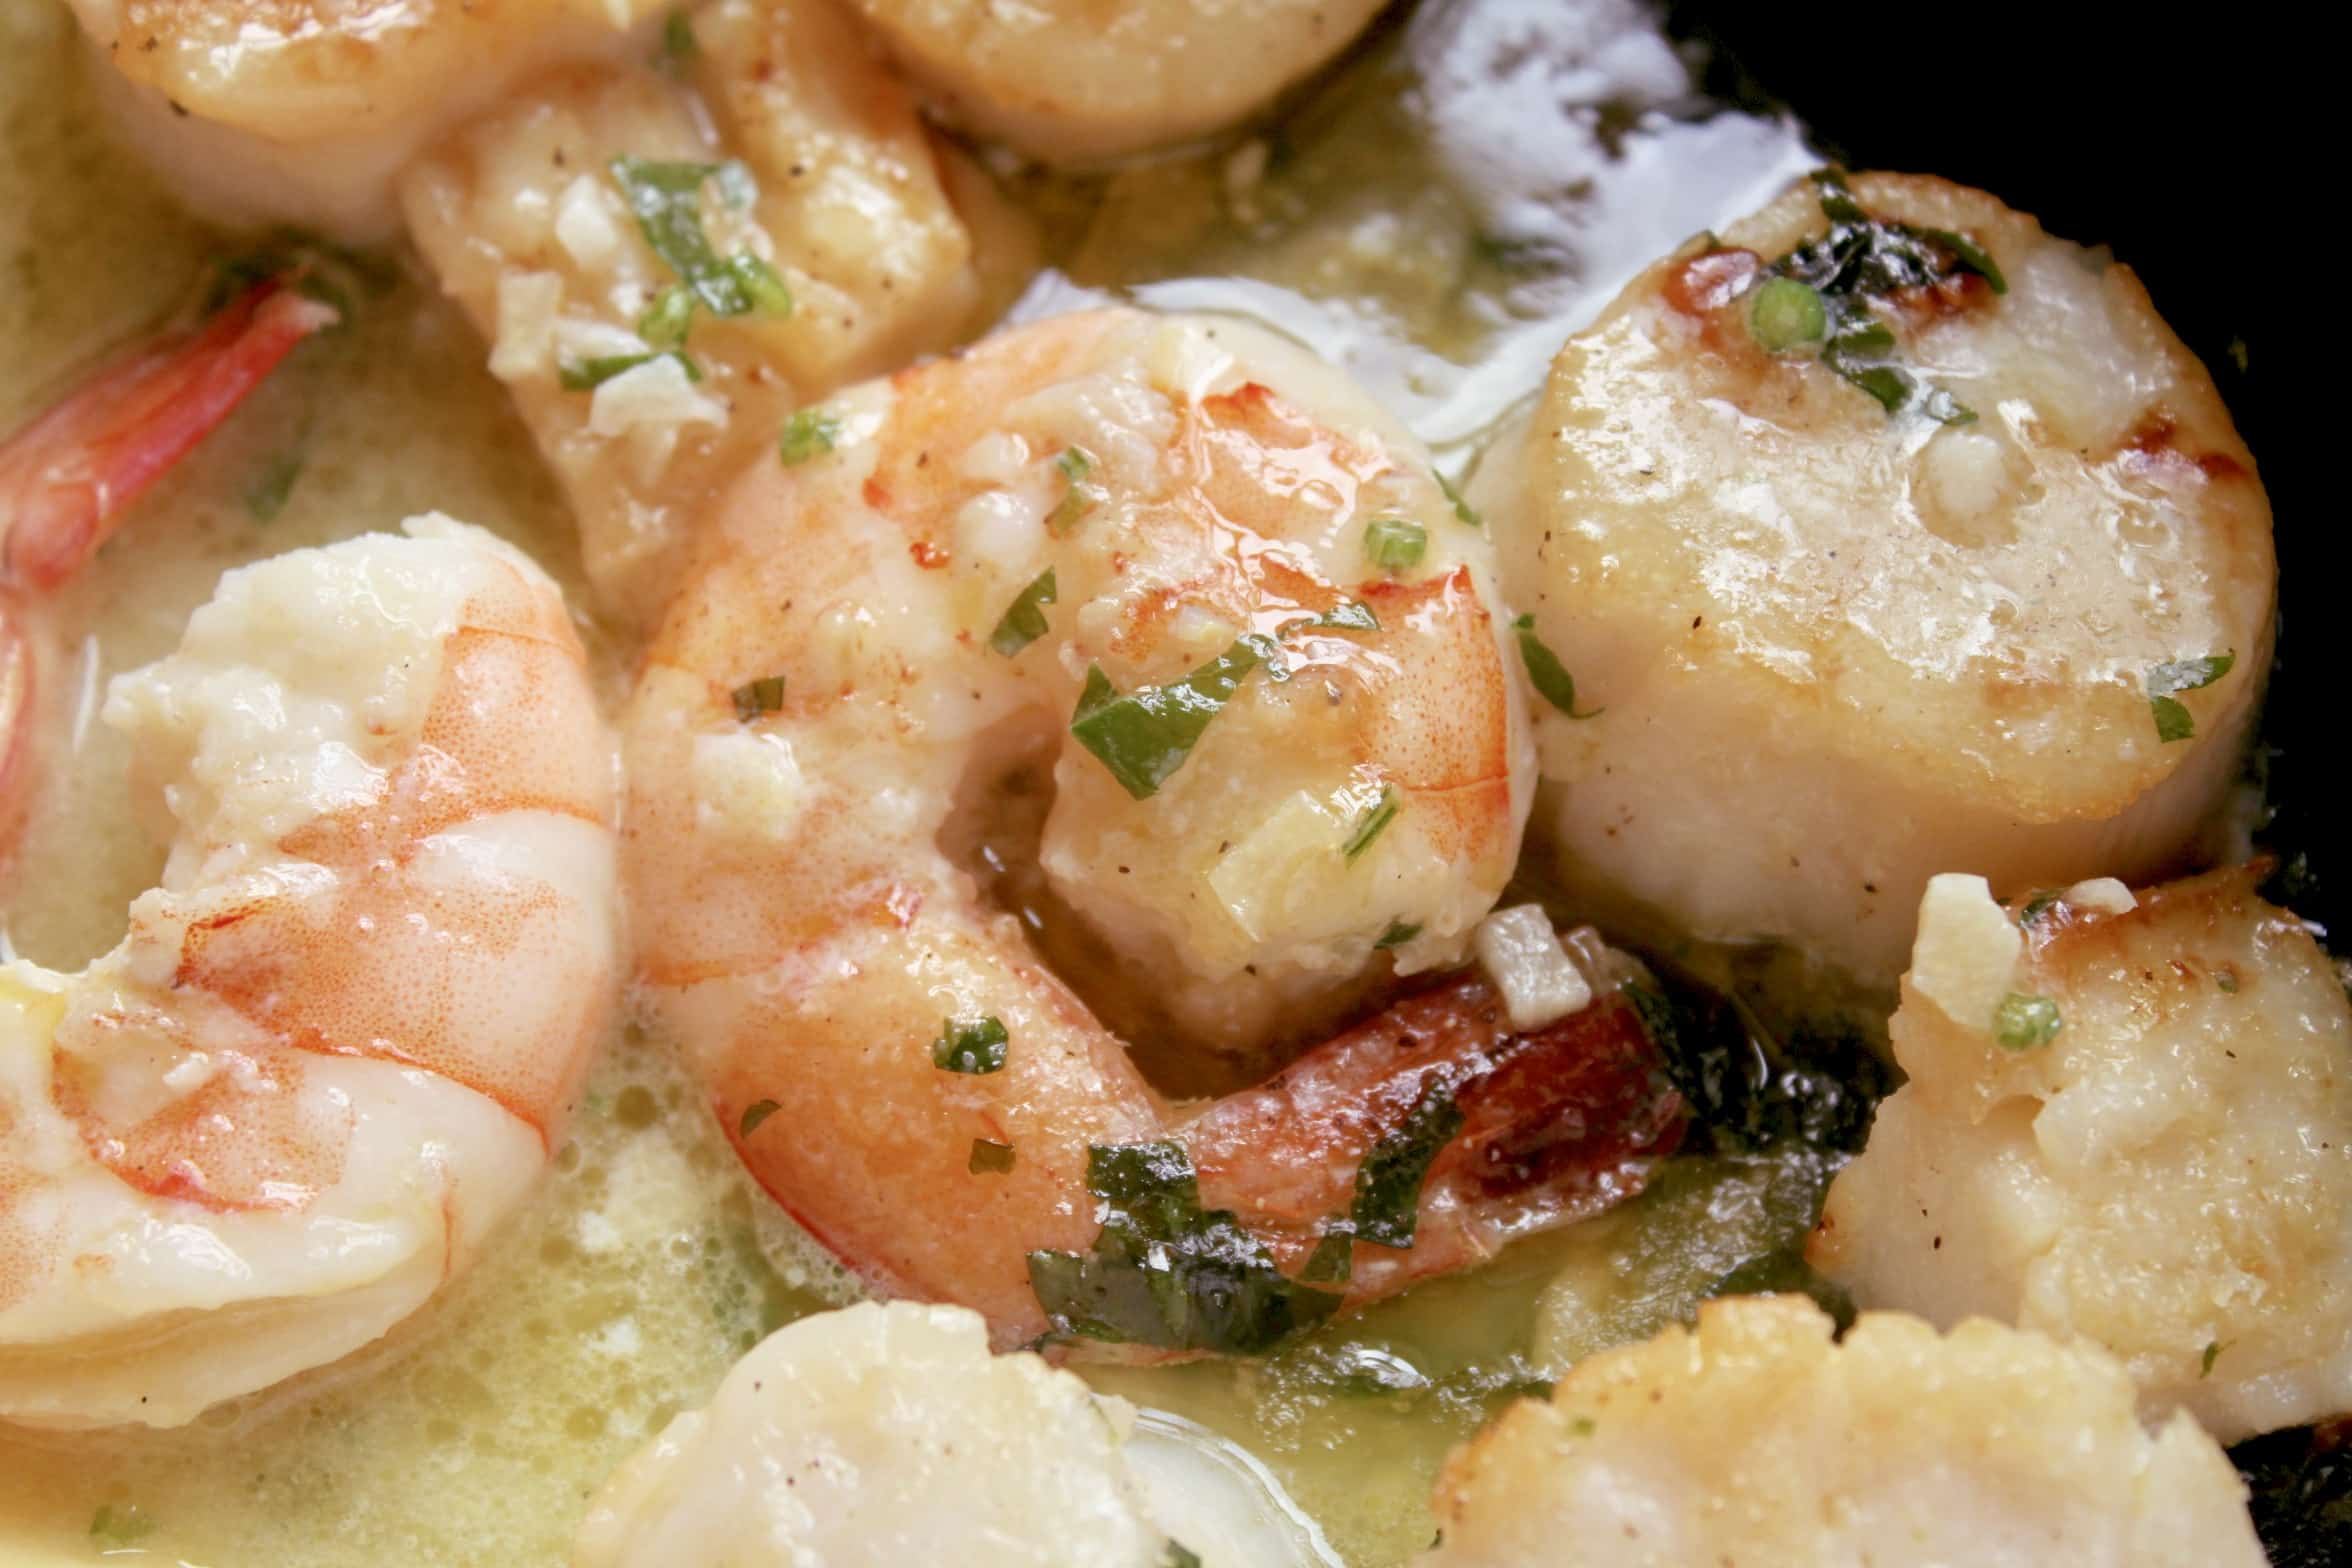 shrimp and scallops in a buttery sauce